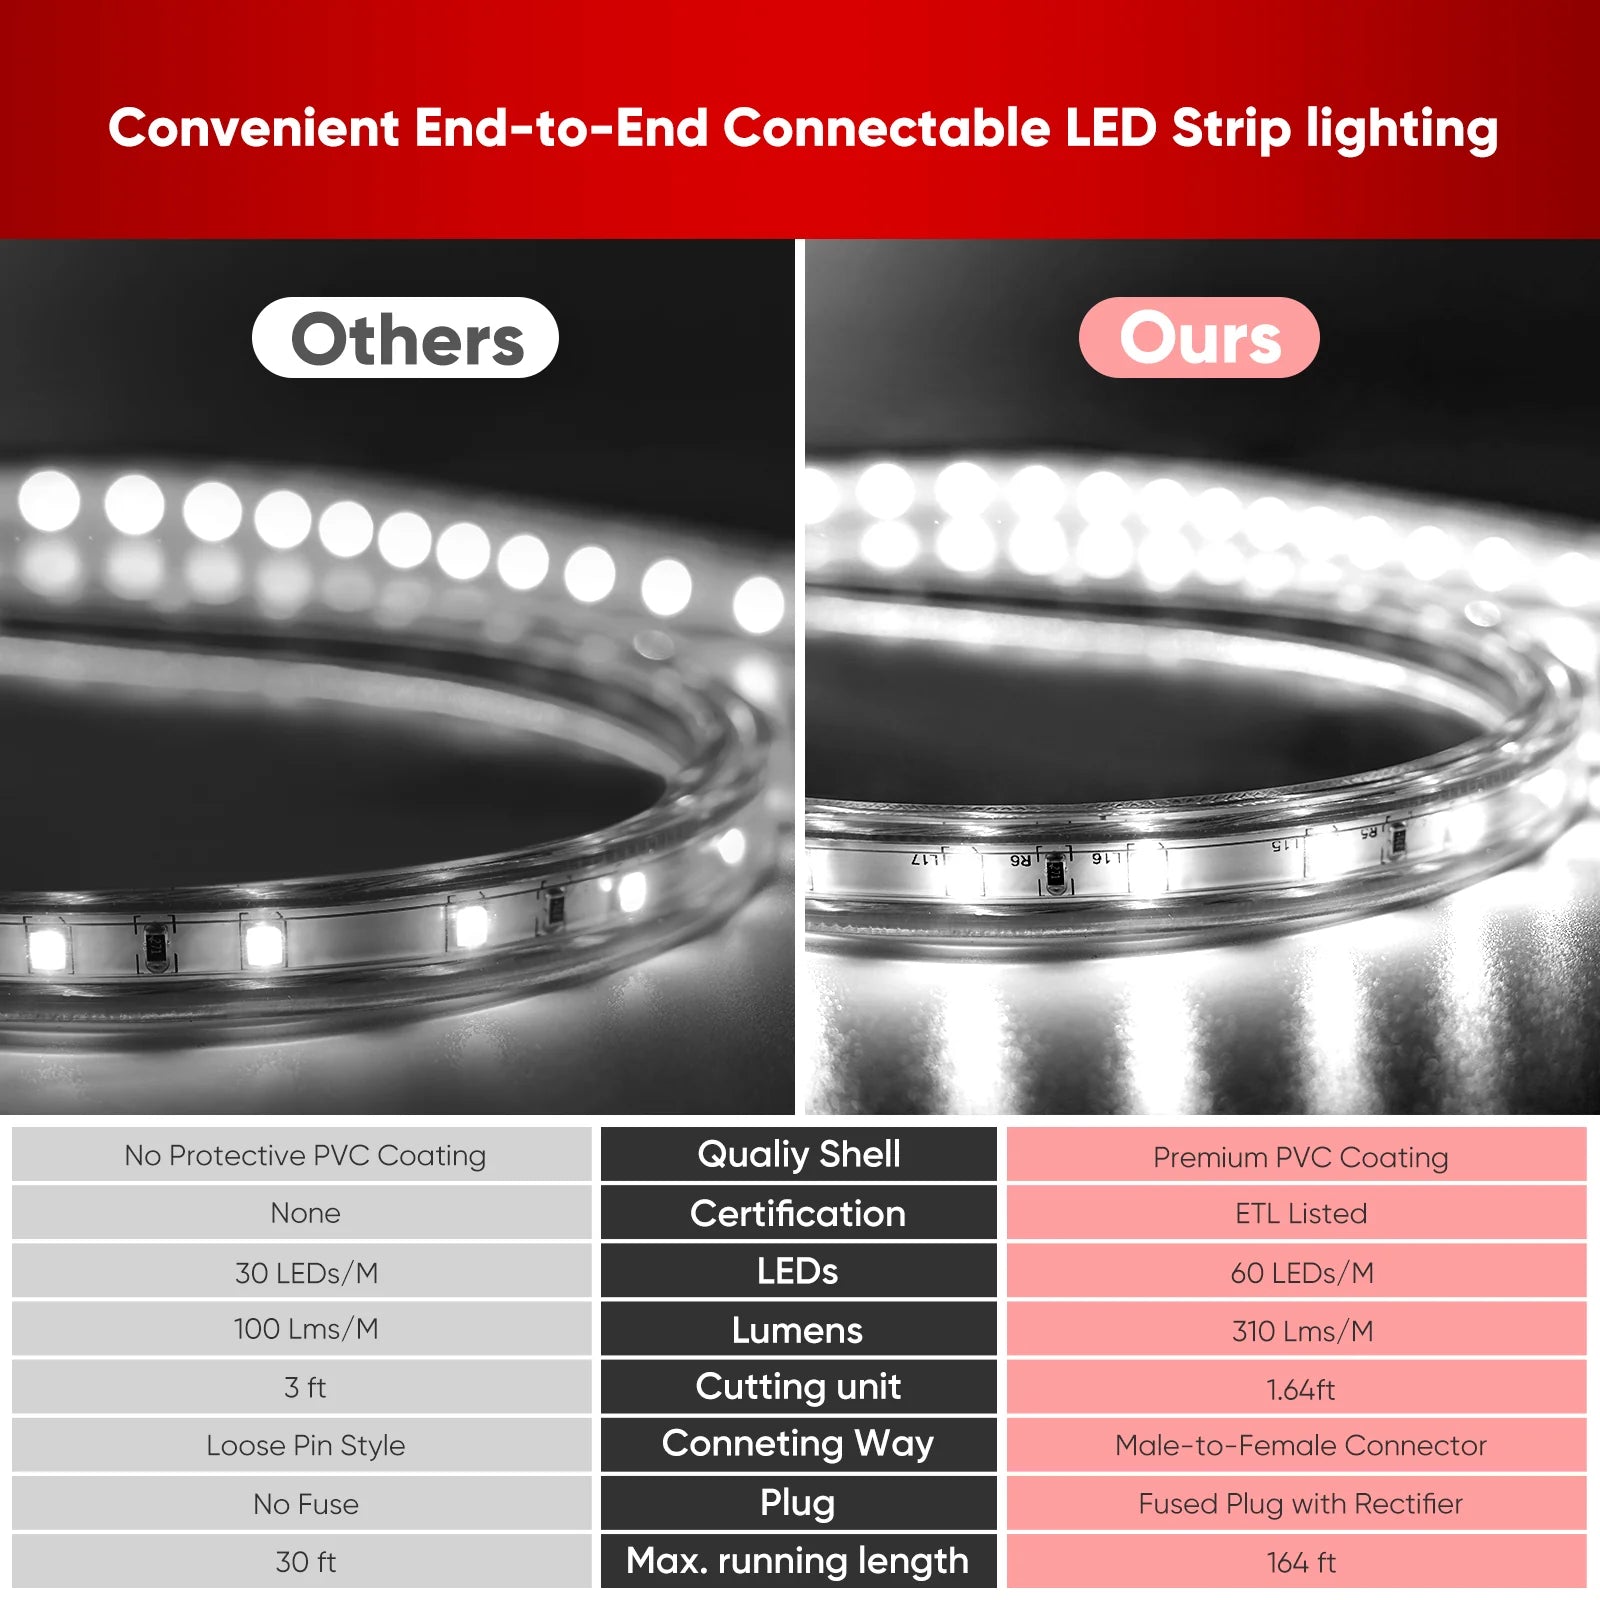 110V 6000K Cool White LED Strip Light - Eco Strip 331 Lumens - Ideal for Indoor and Outdoor Use